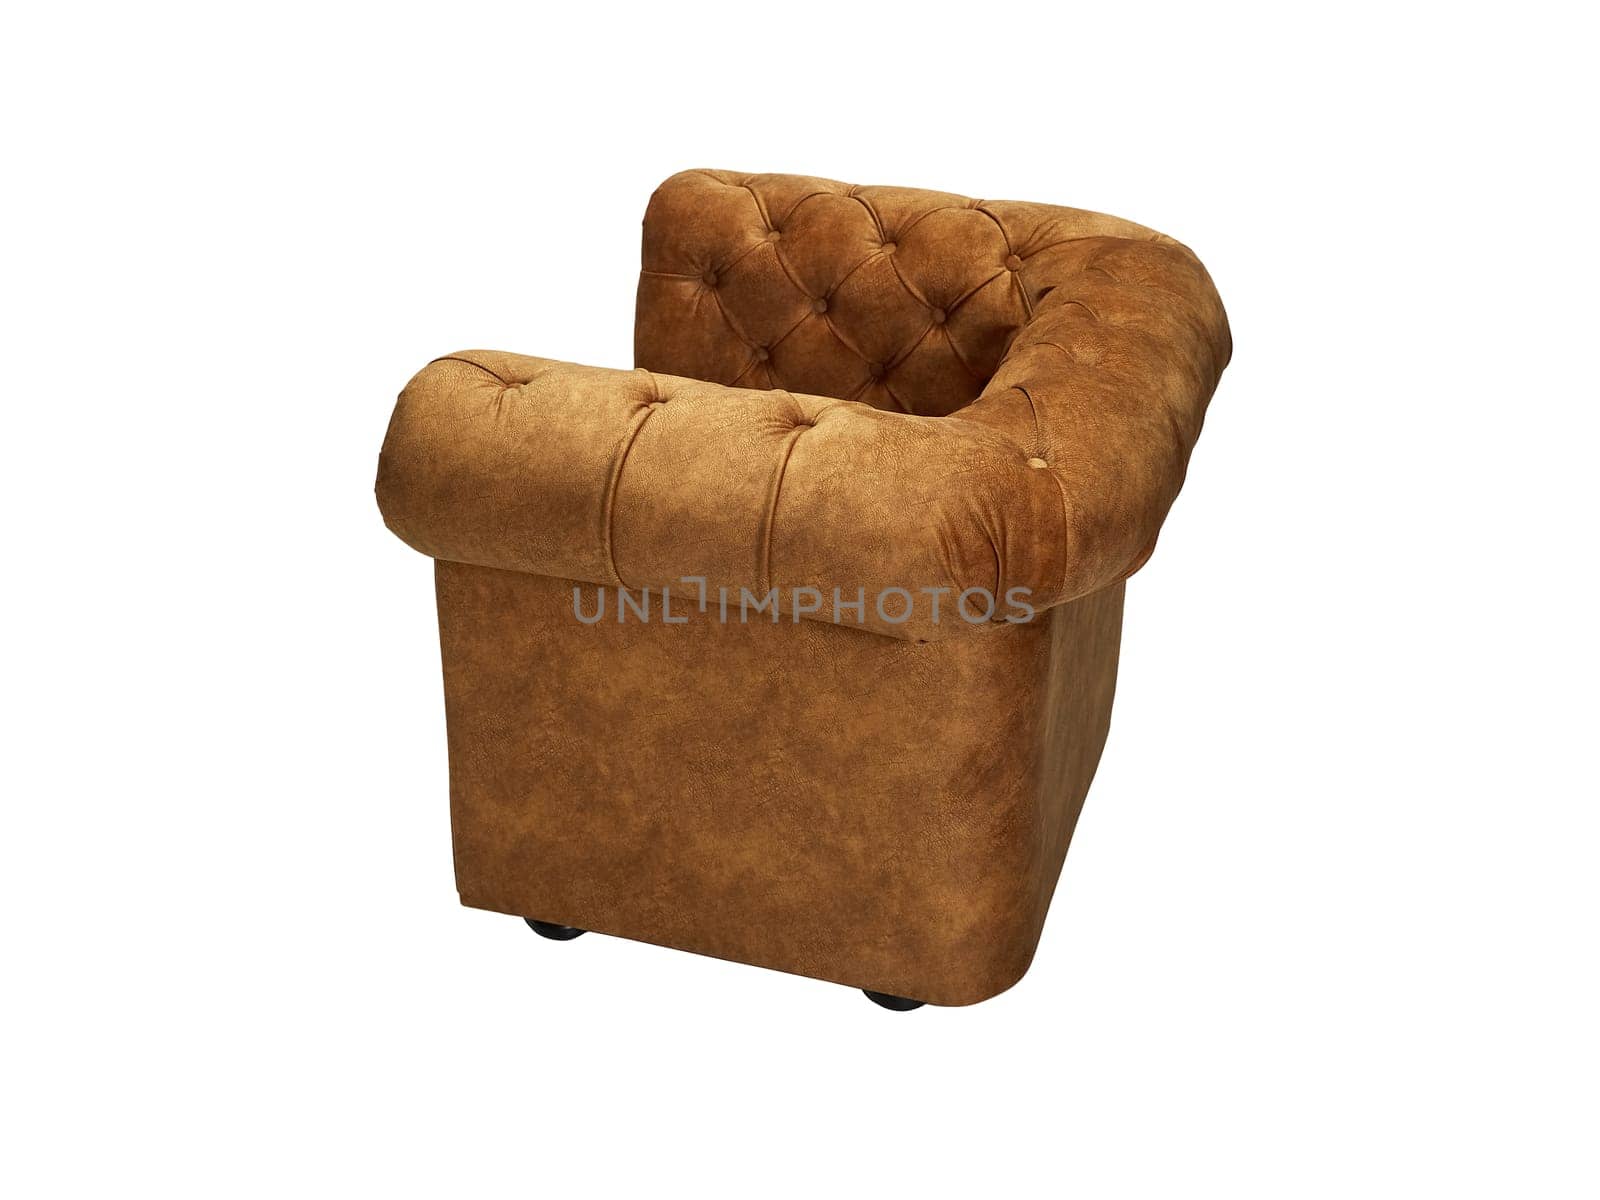 vintage brown leather armchair isolated on white background, back view.